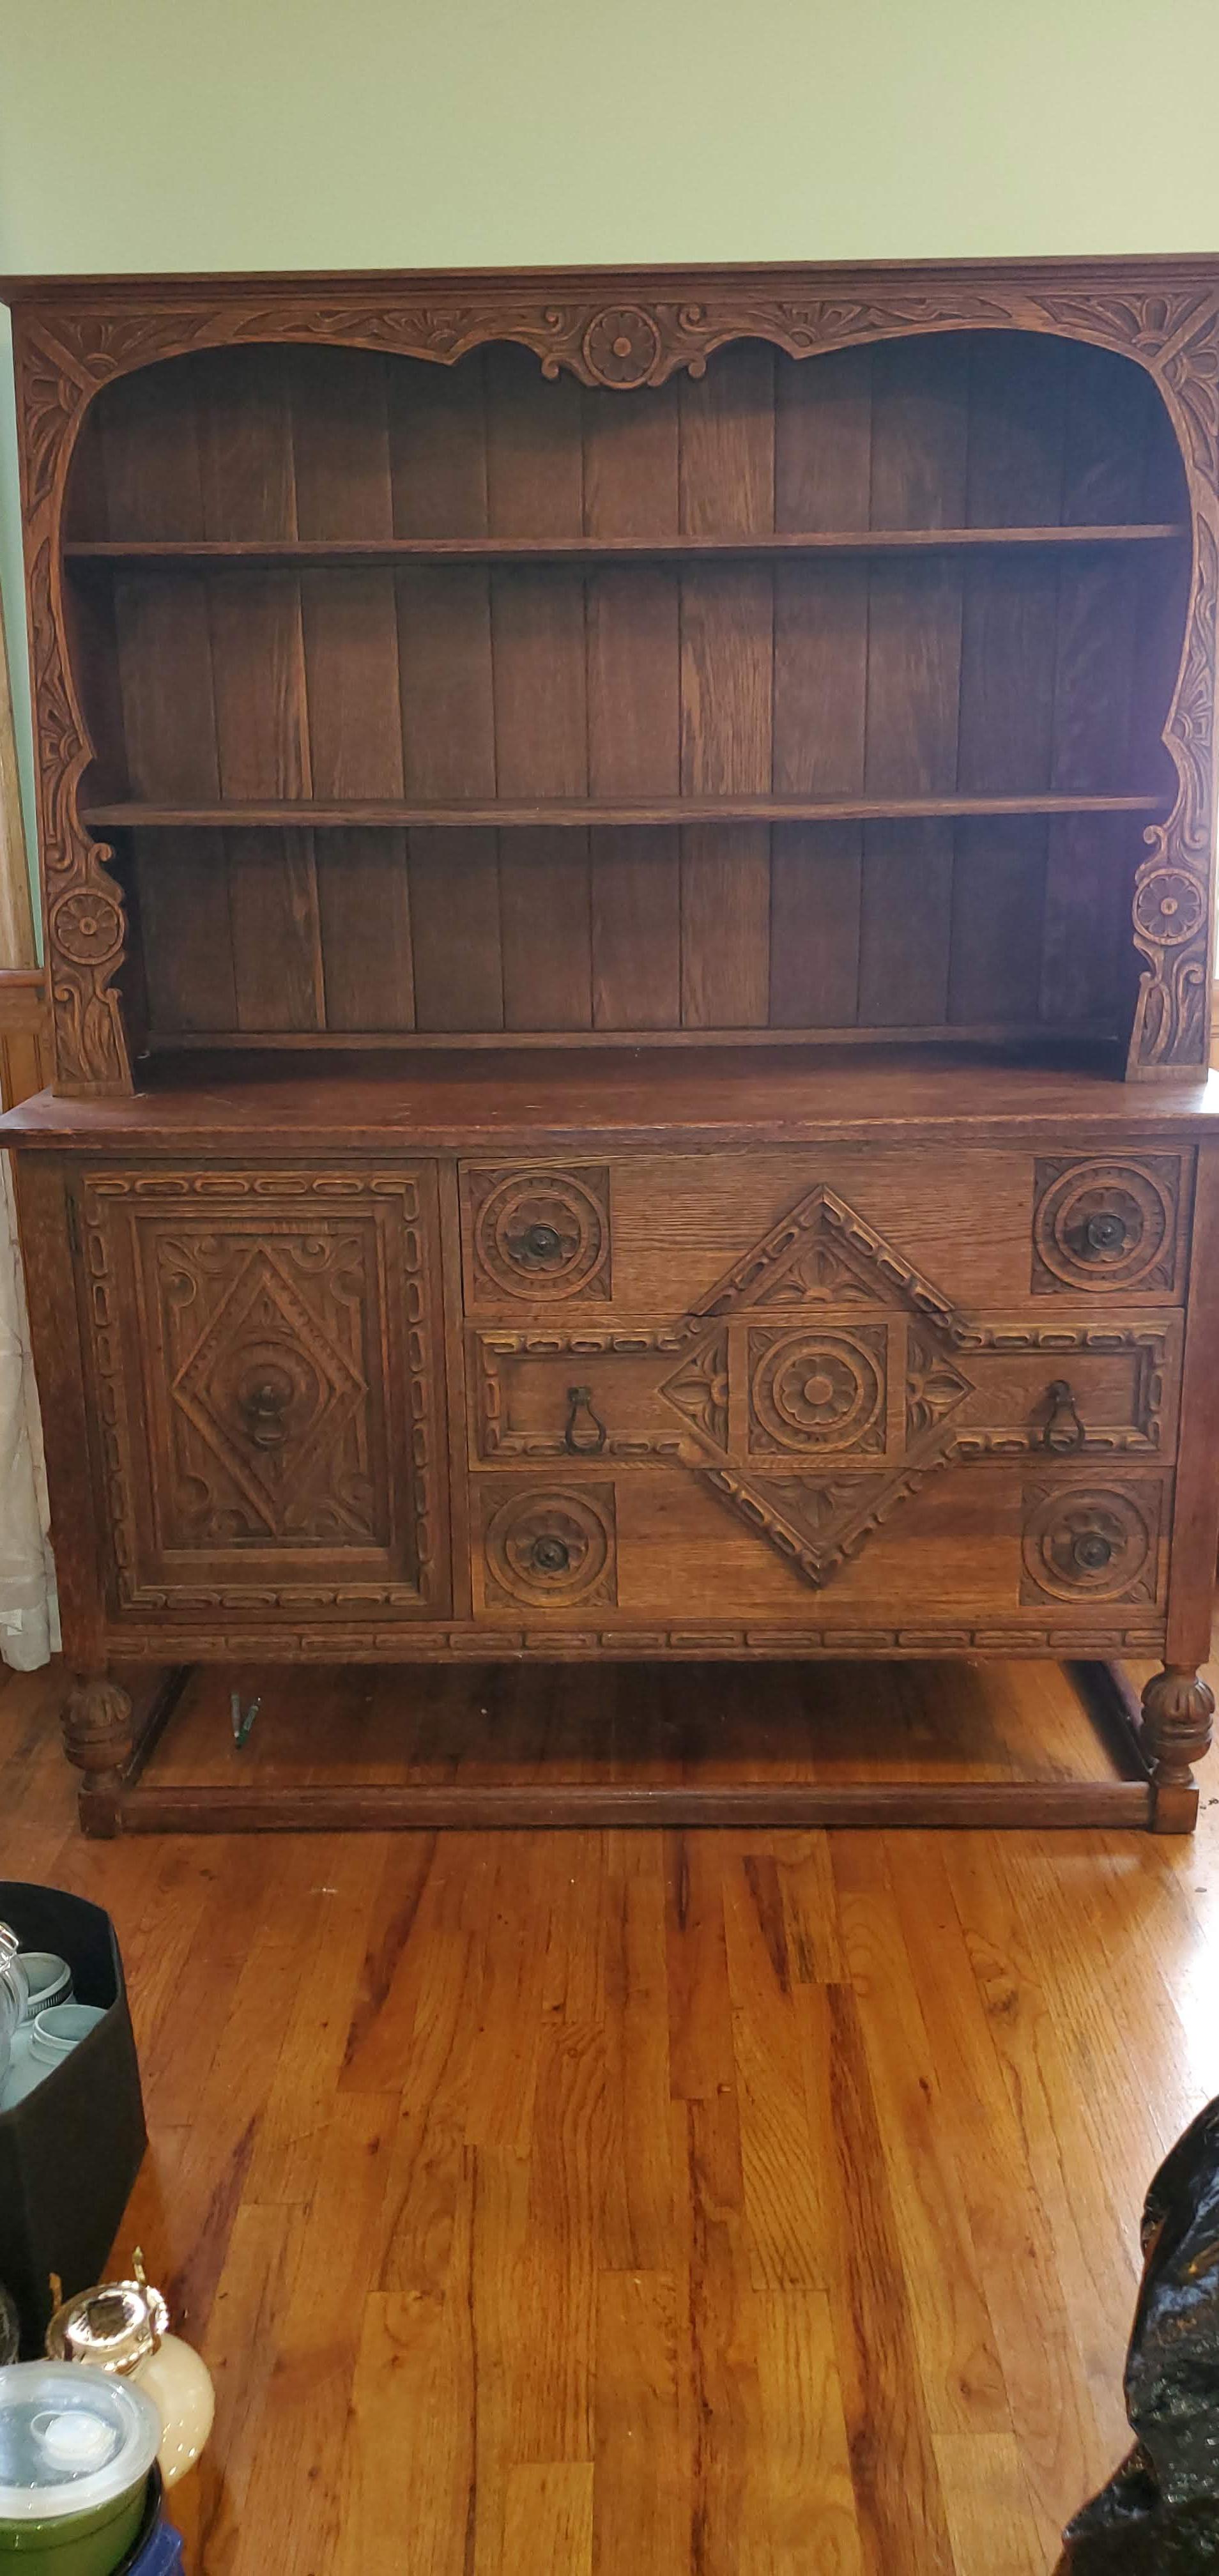 Early Exquisite Heavily Carved European Style Hutch made in the Grand Rapids Furniture District